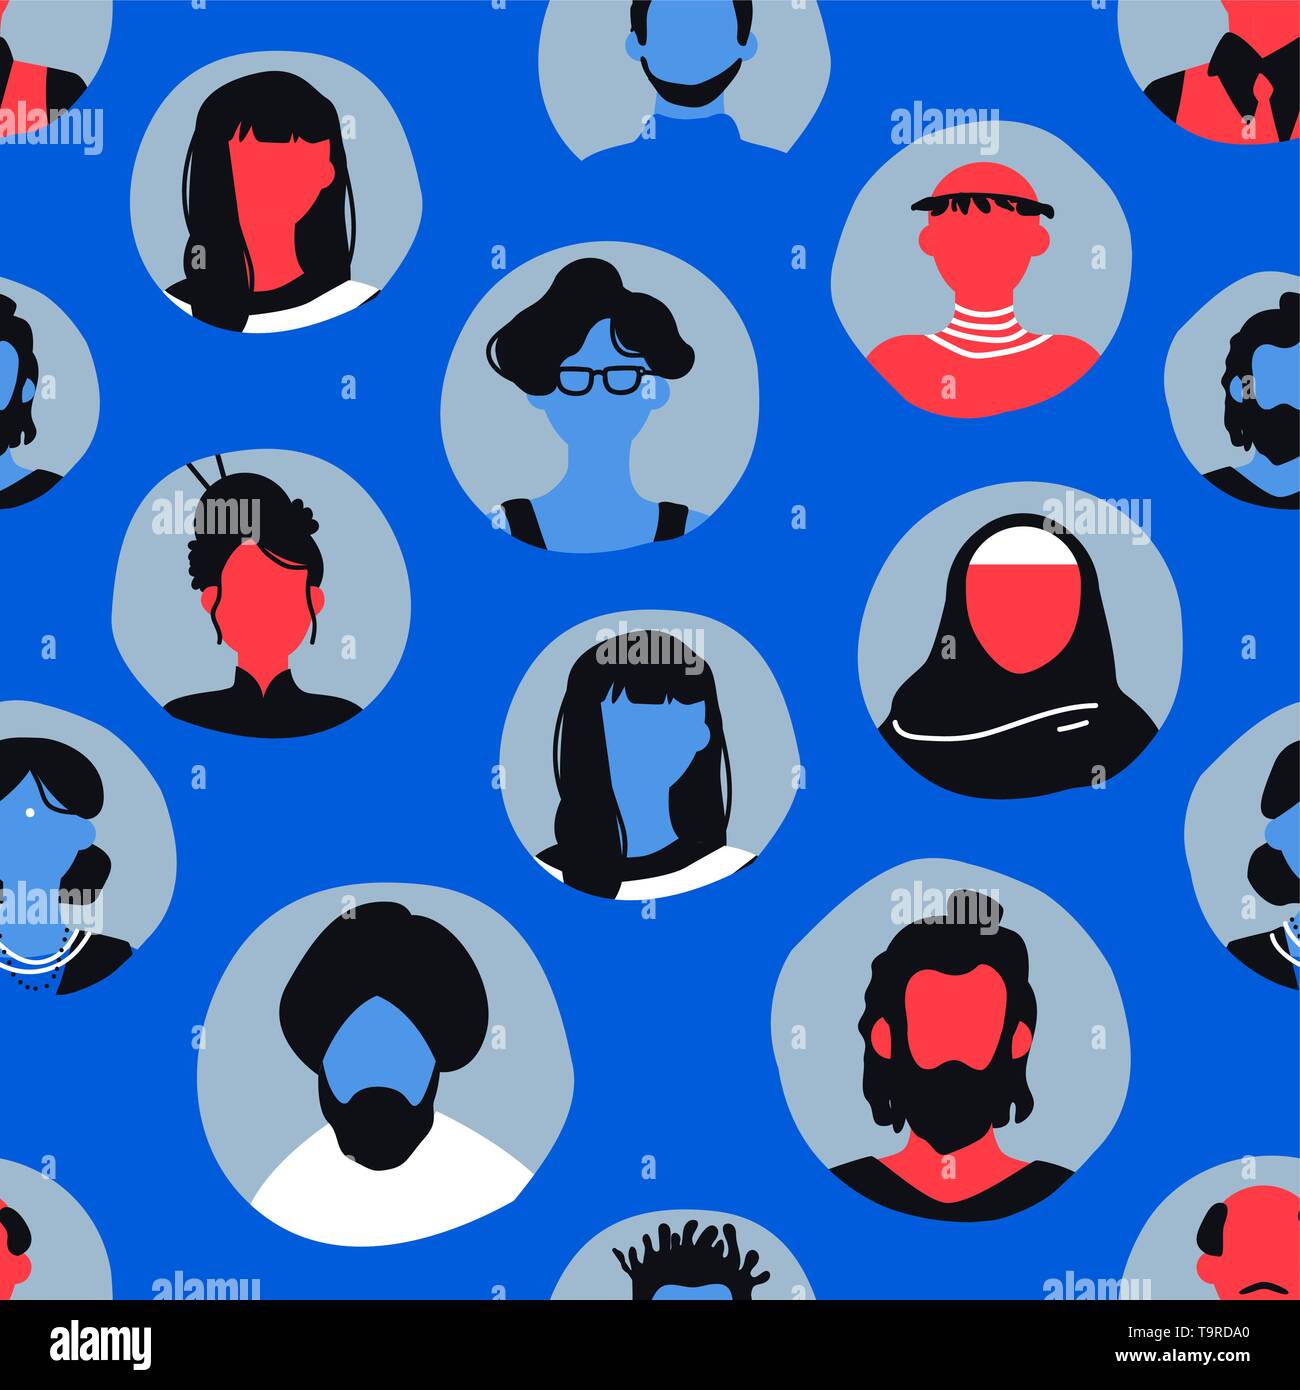 avatar icon, office icon, look icon, people icon, man icon, women icon,  woman icon, human icon